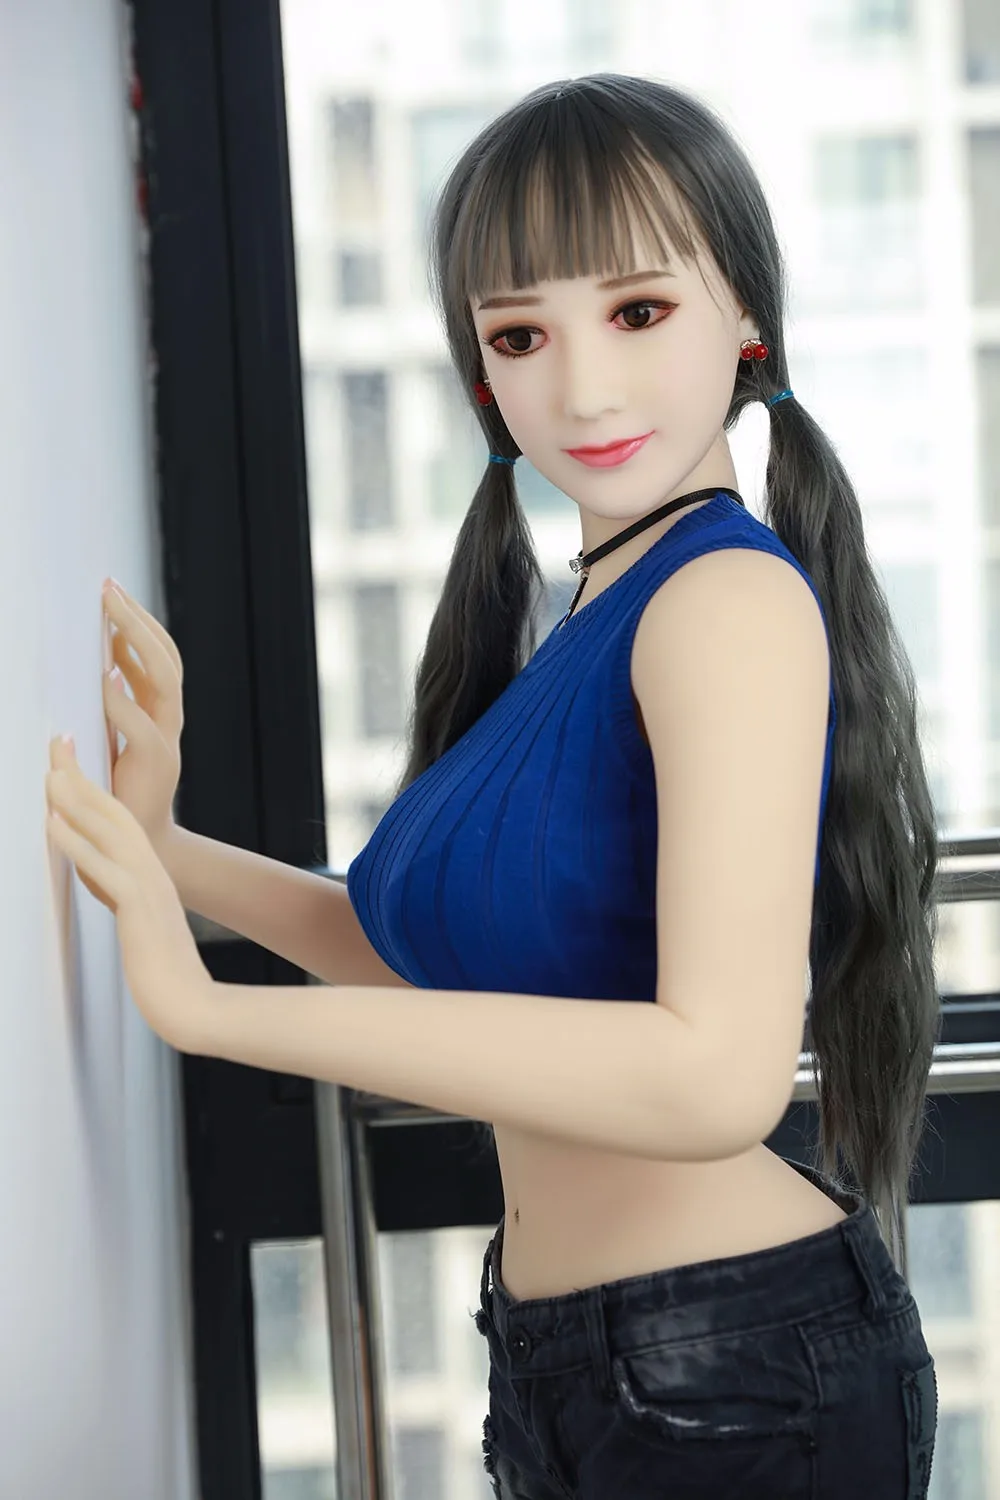 Qcldoll Adult Sex Toy Silicone Dolls